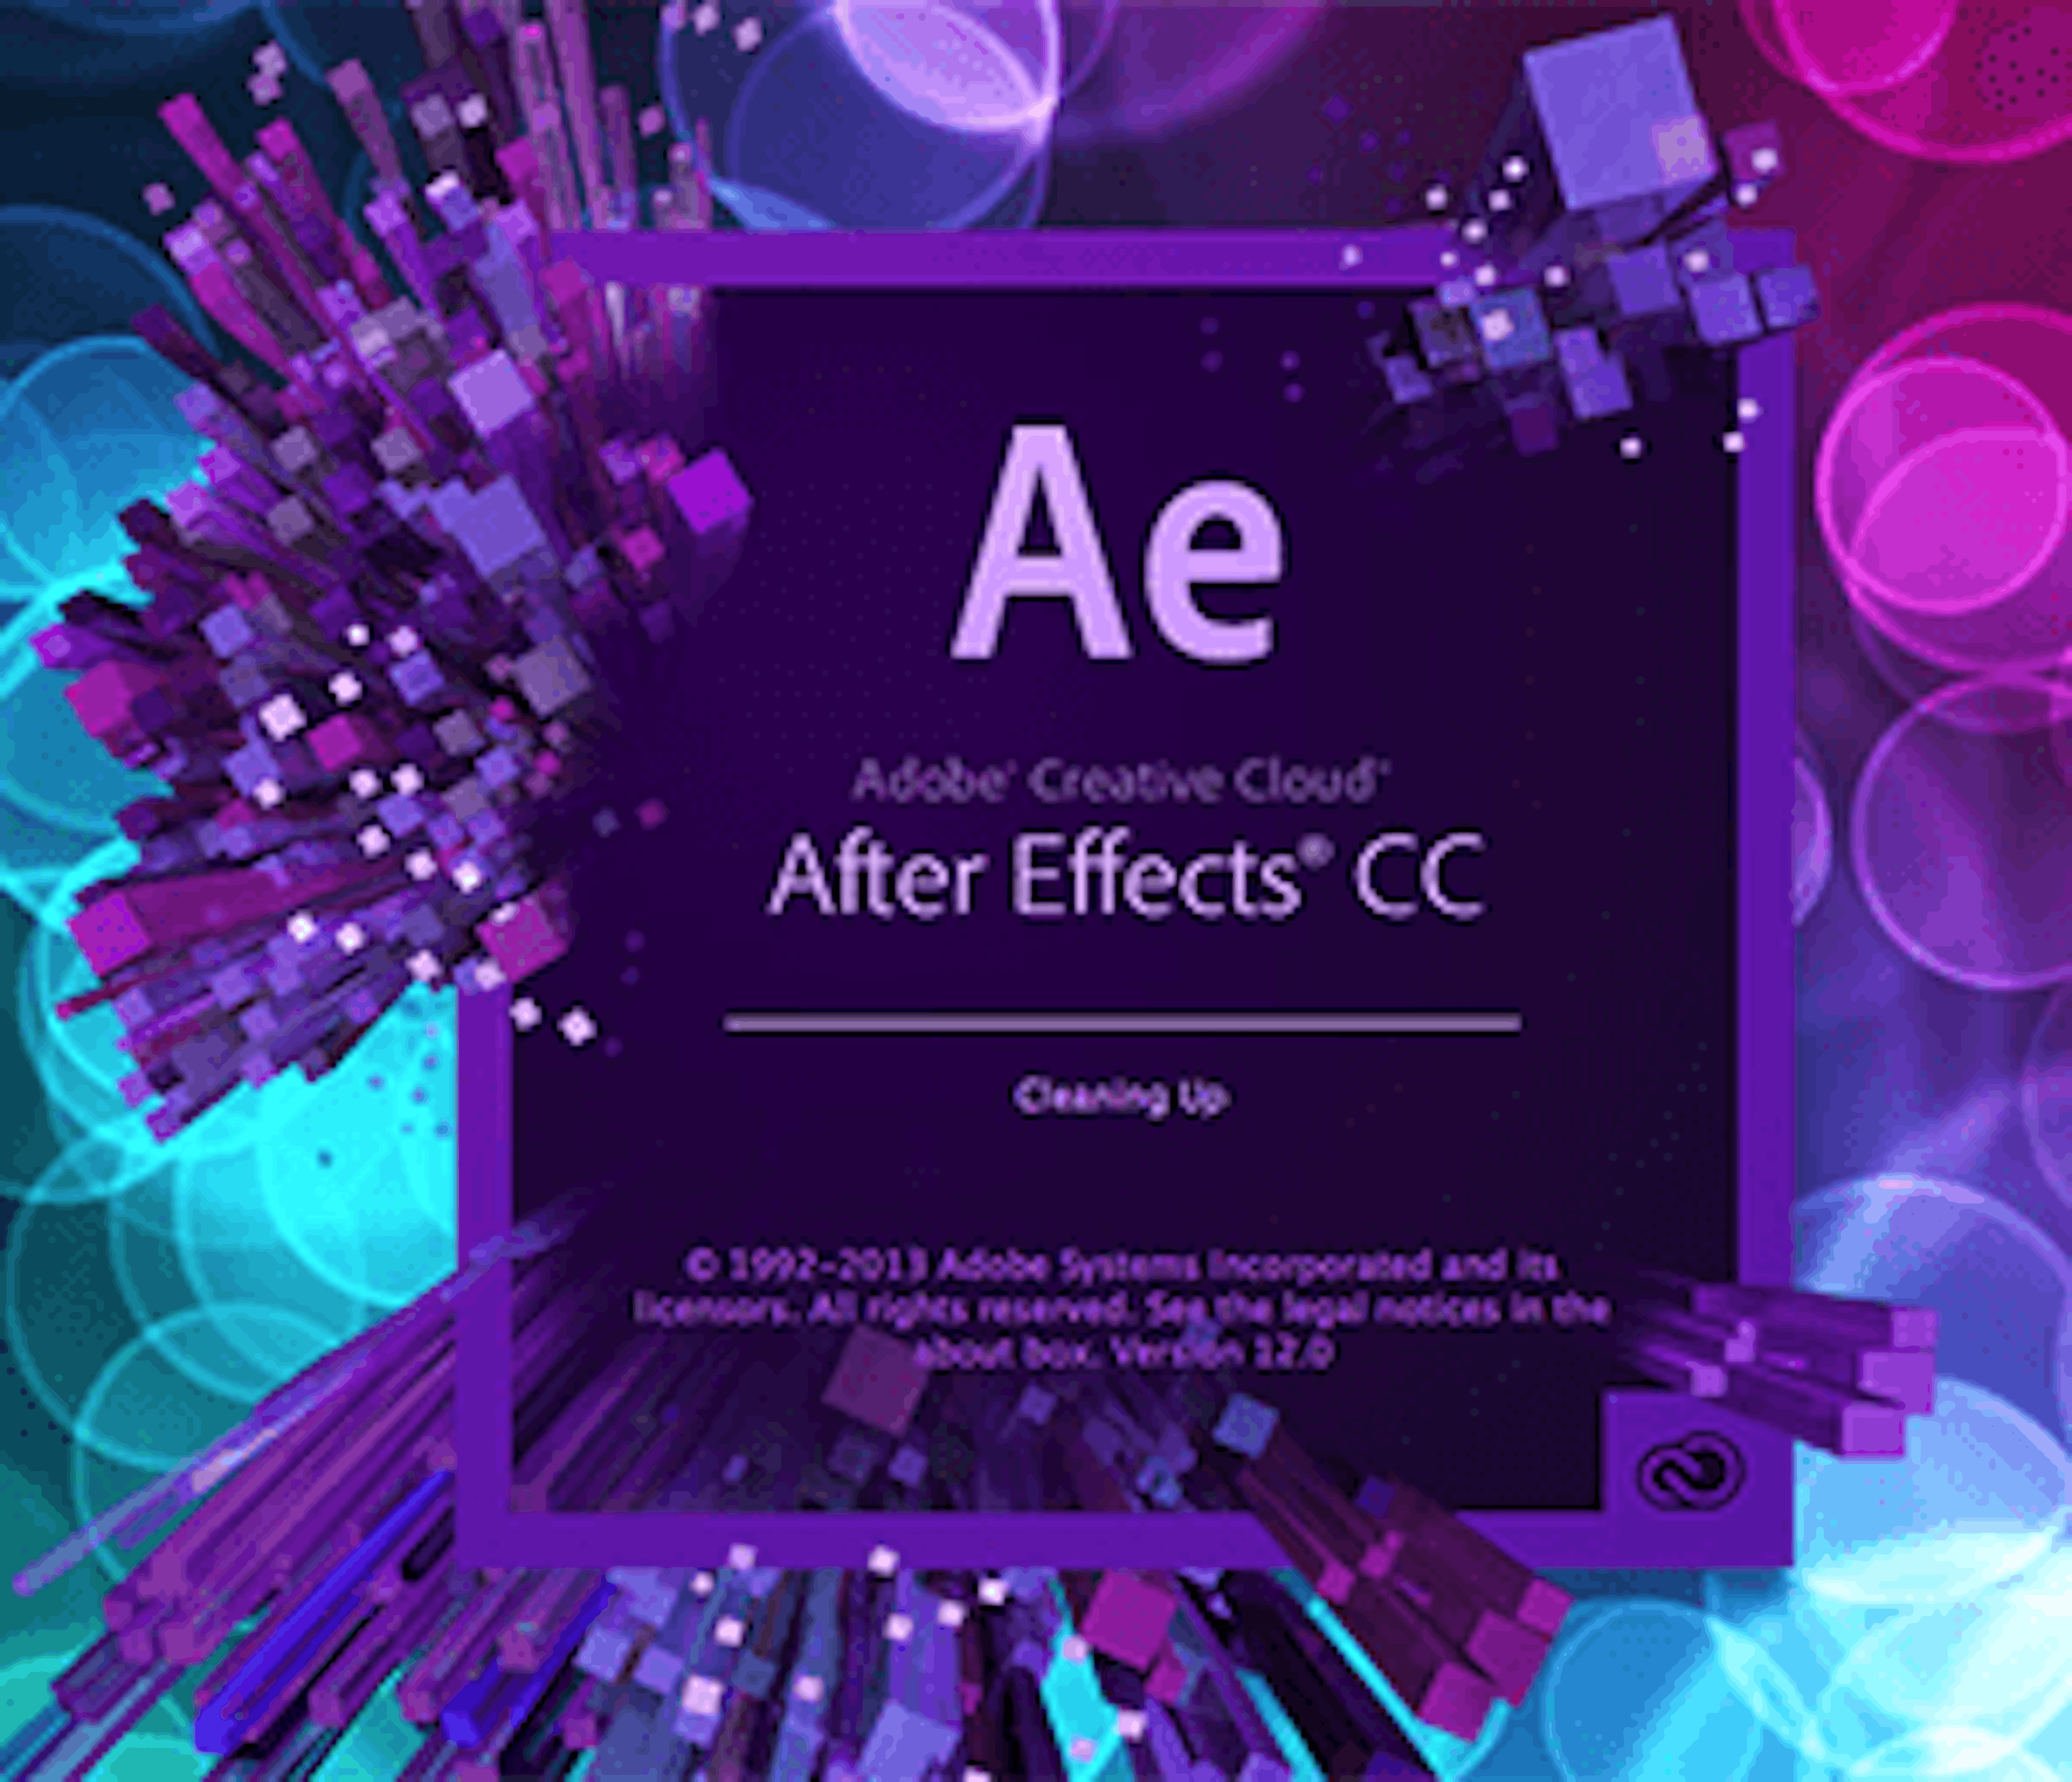 After effects работа. Adobe after Effects. Адобе эффект. Adobe after Effects 2021. Adobe after Effects логотип.